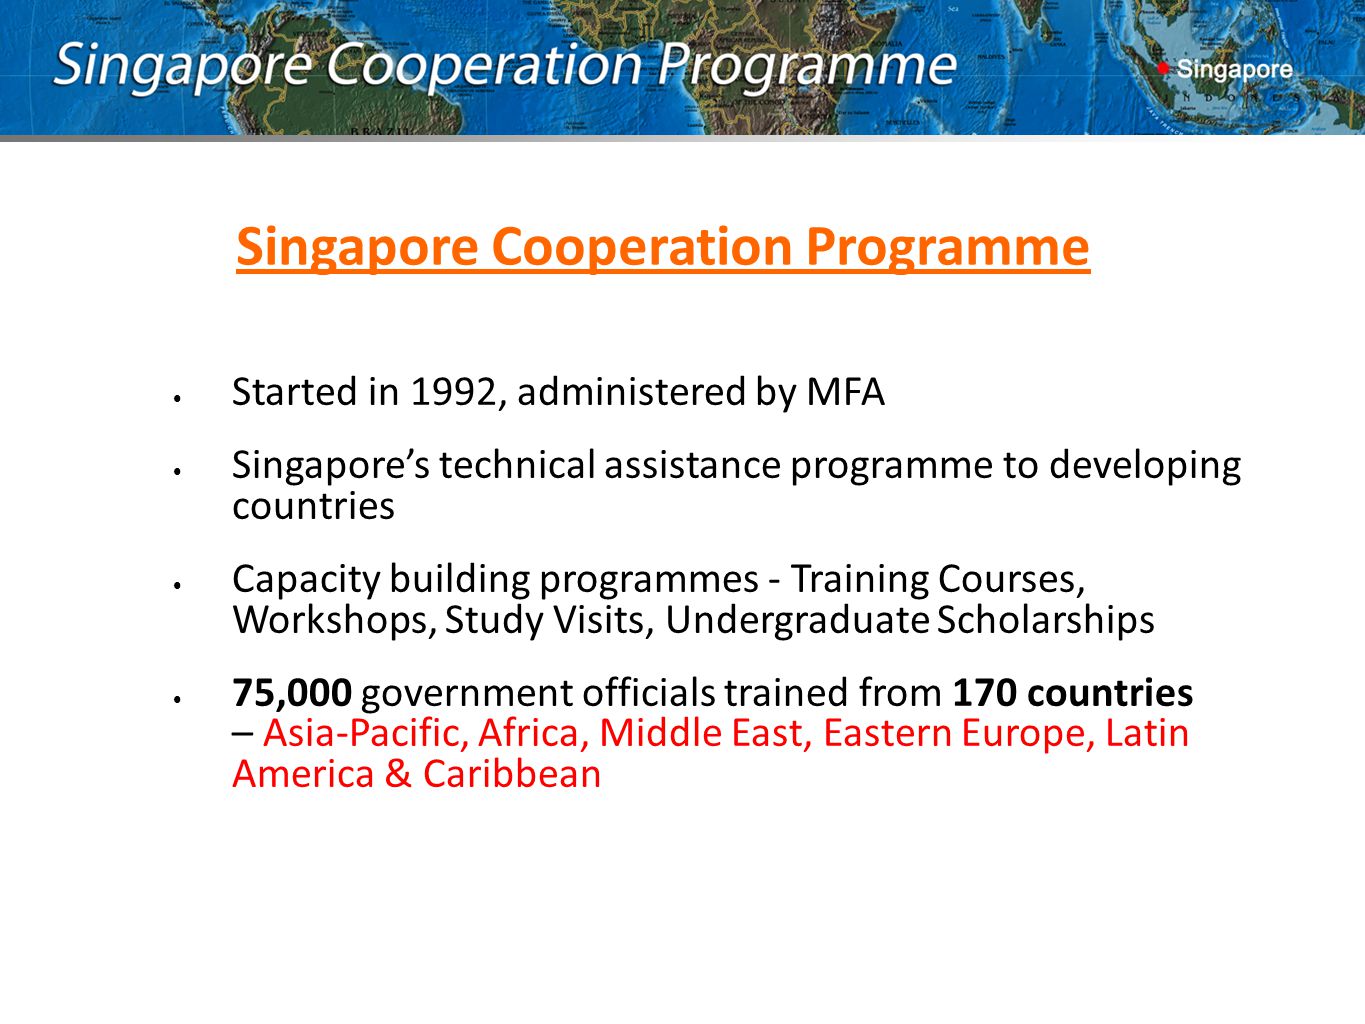 Singapore Cooperation Programme Started in 1992, administered by MFA Singapore’s technical assistance programme to developing countries Capacity building programmes - Training Courses, Workshops, Study Visits, Undergraduate Scholarships 75,000 government officials trained from 170 countries – Asia-Pacific, Africa, Middle East, Eastern Europe, Latin America & Caribbean